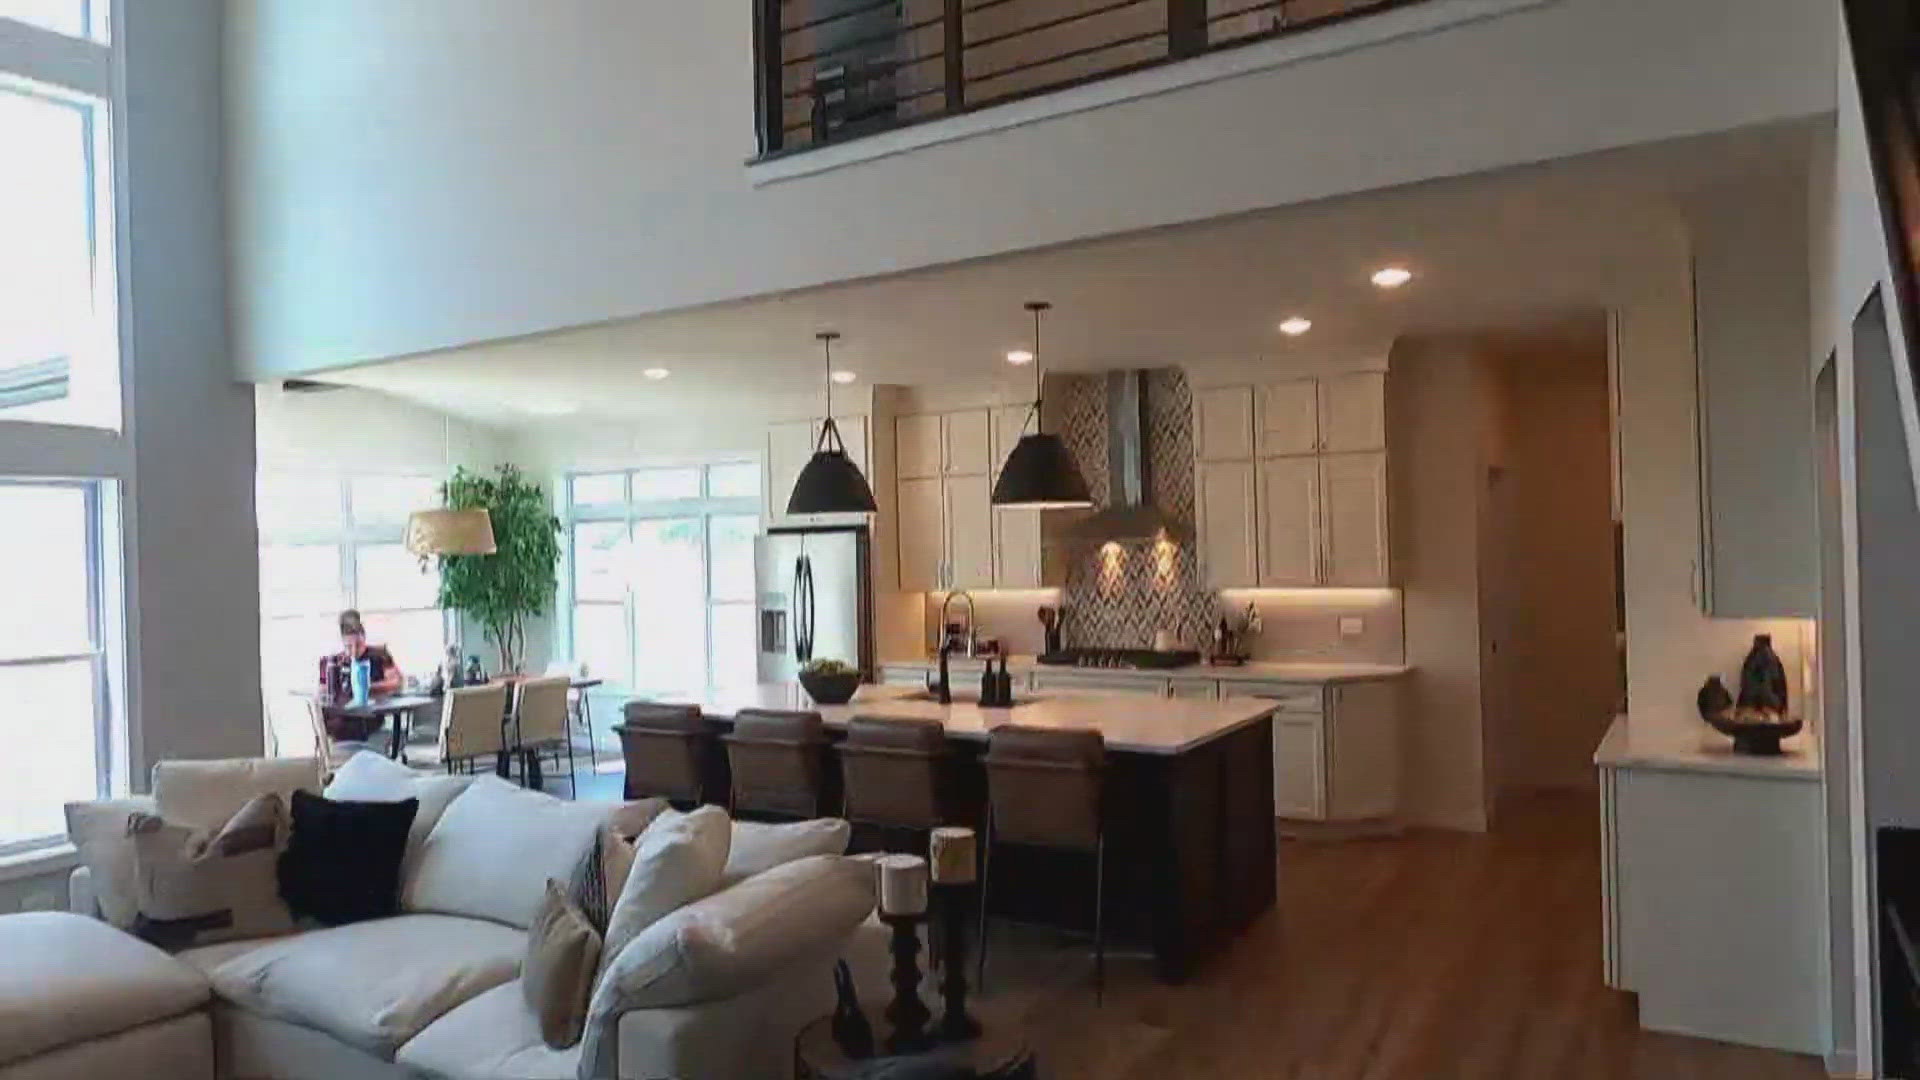 The Lake County YMCA's Dream House Contest fundraiser is back for the first time since the COVID-19 pandemic. 3News' Stephanie Haney gives us a First Look.